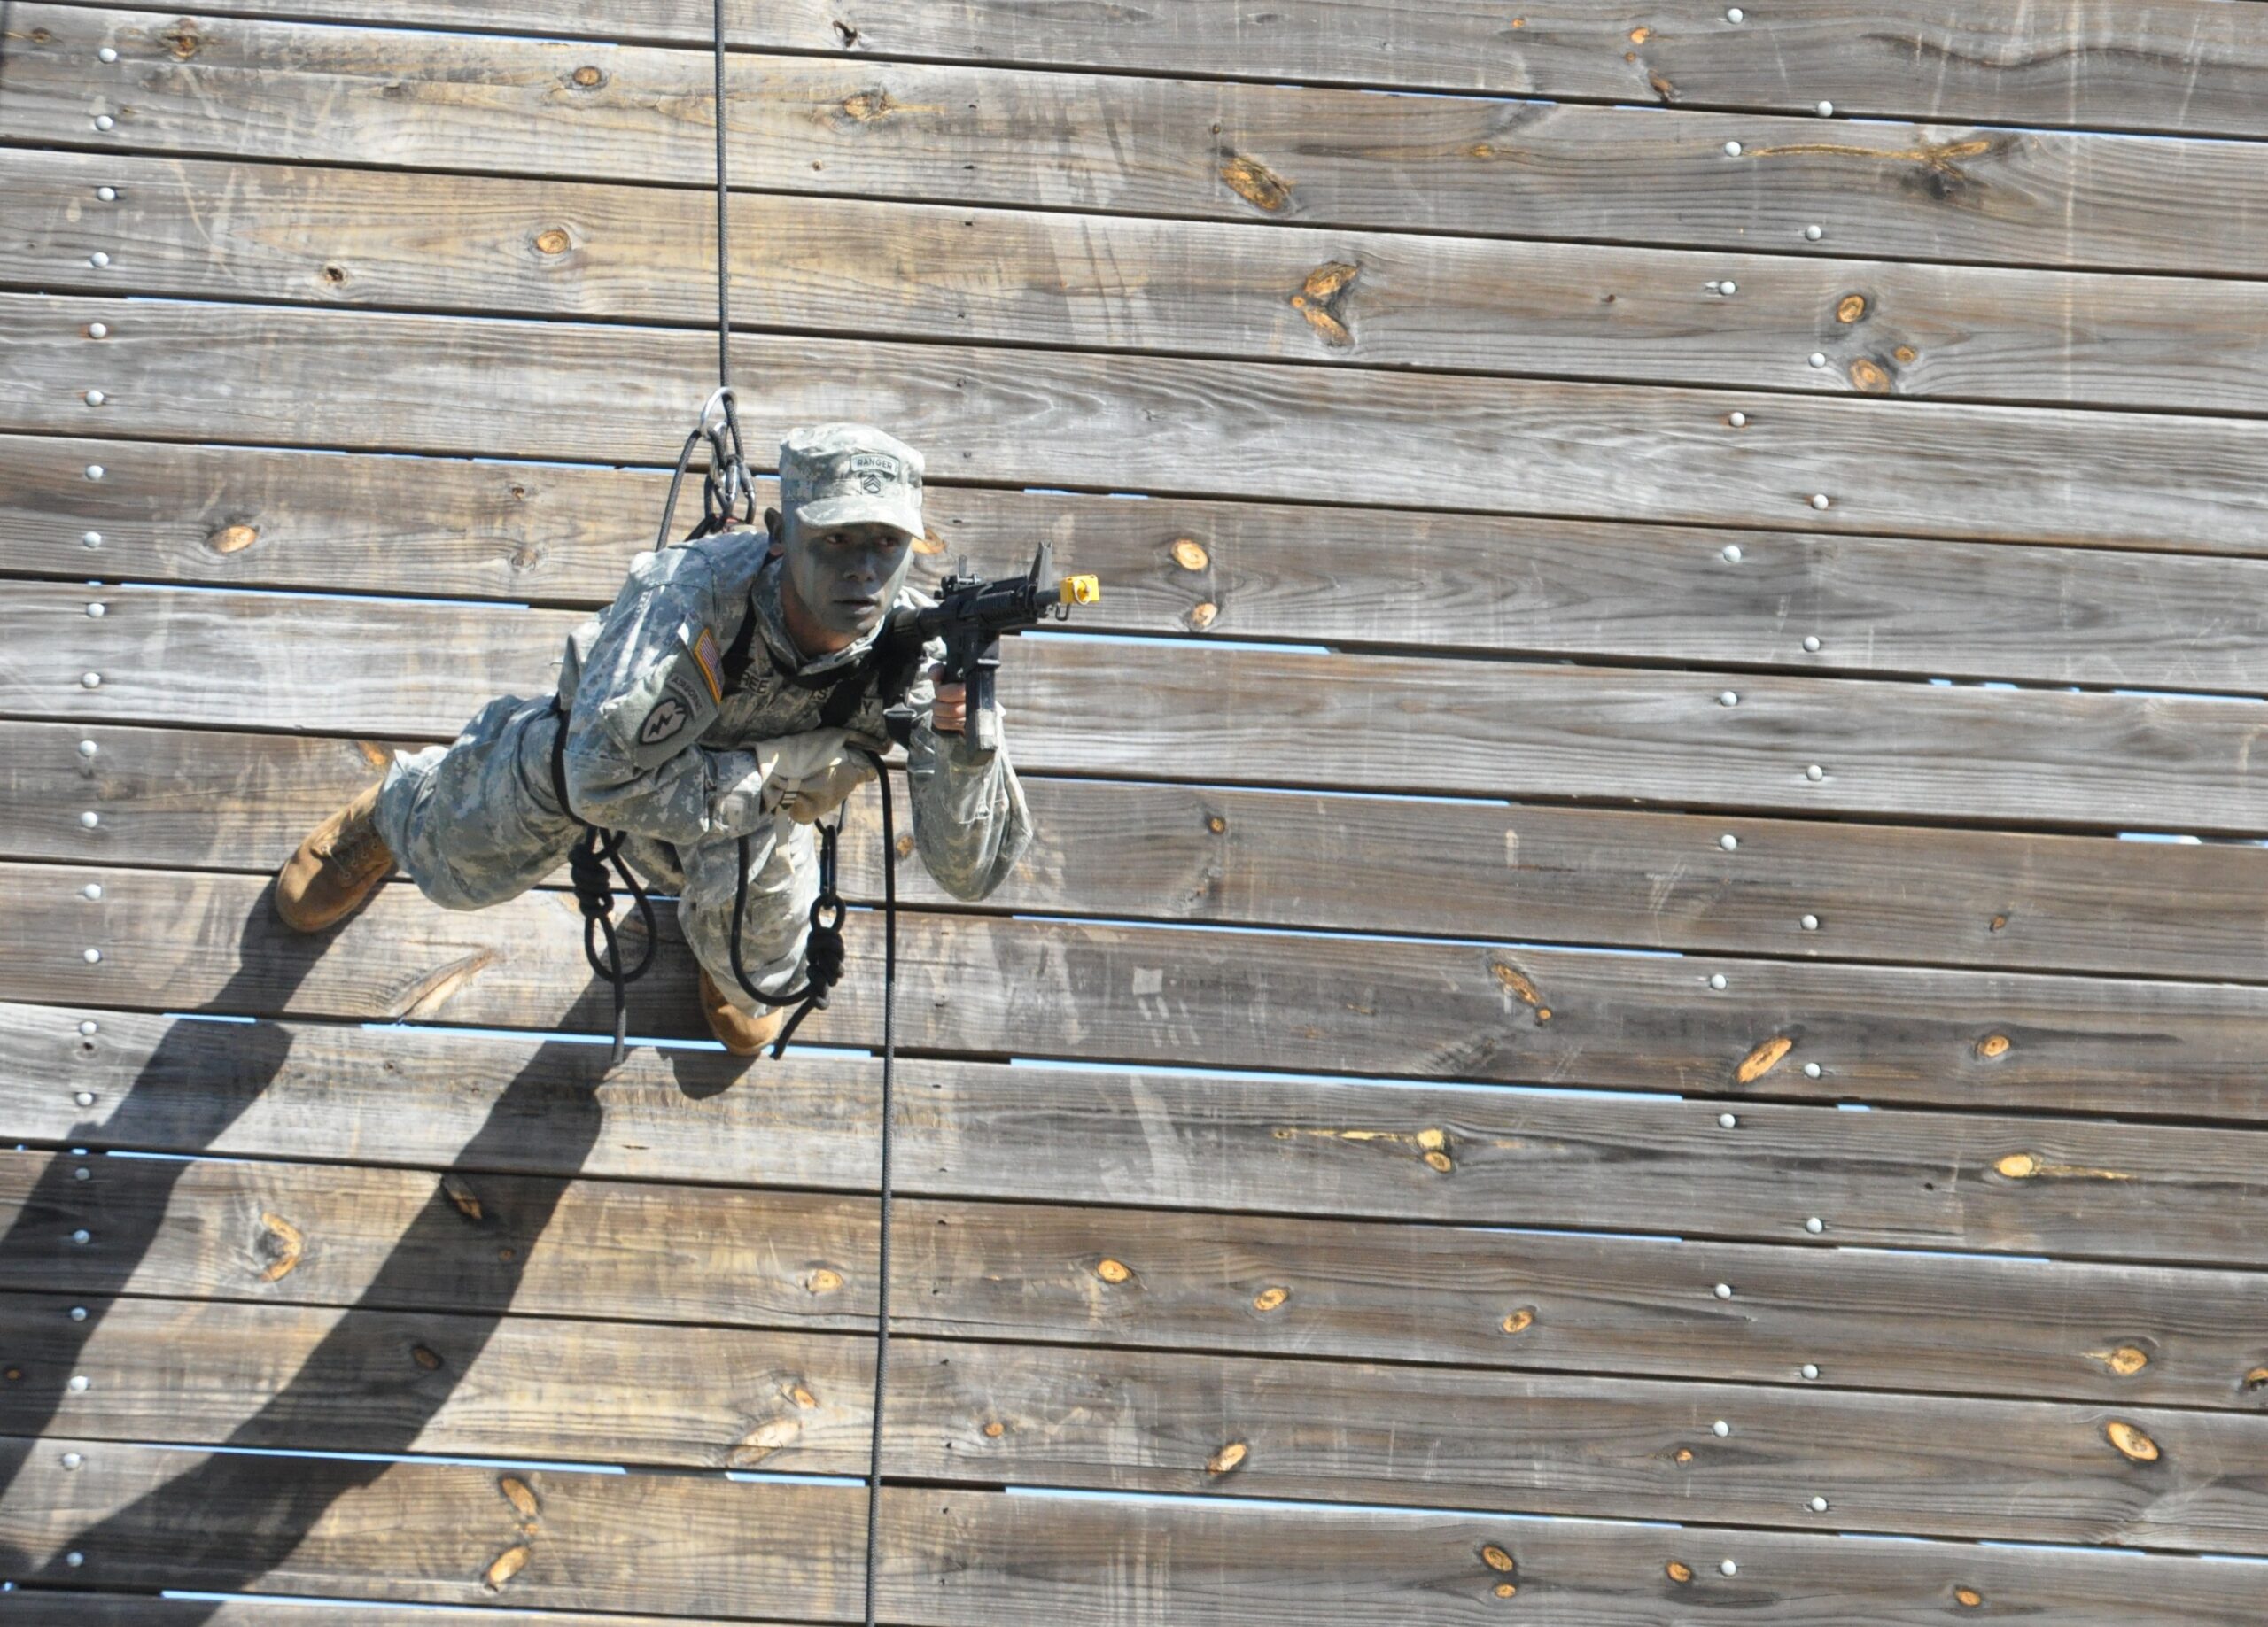 Why the Australian Rappel is as cool as it looks